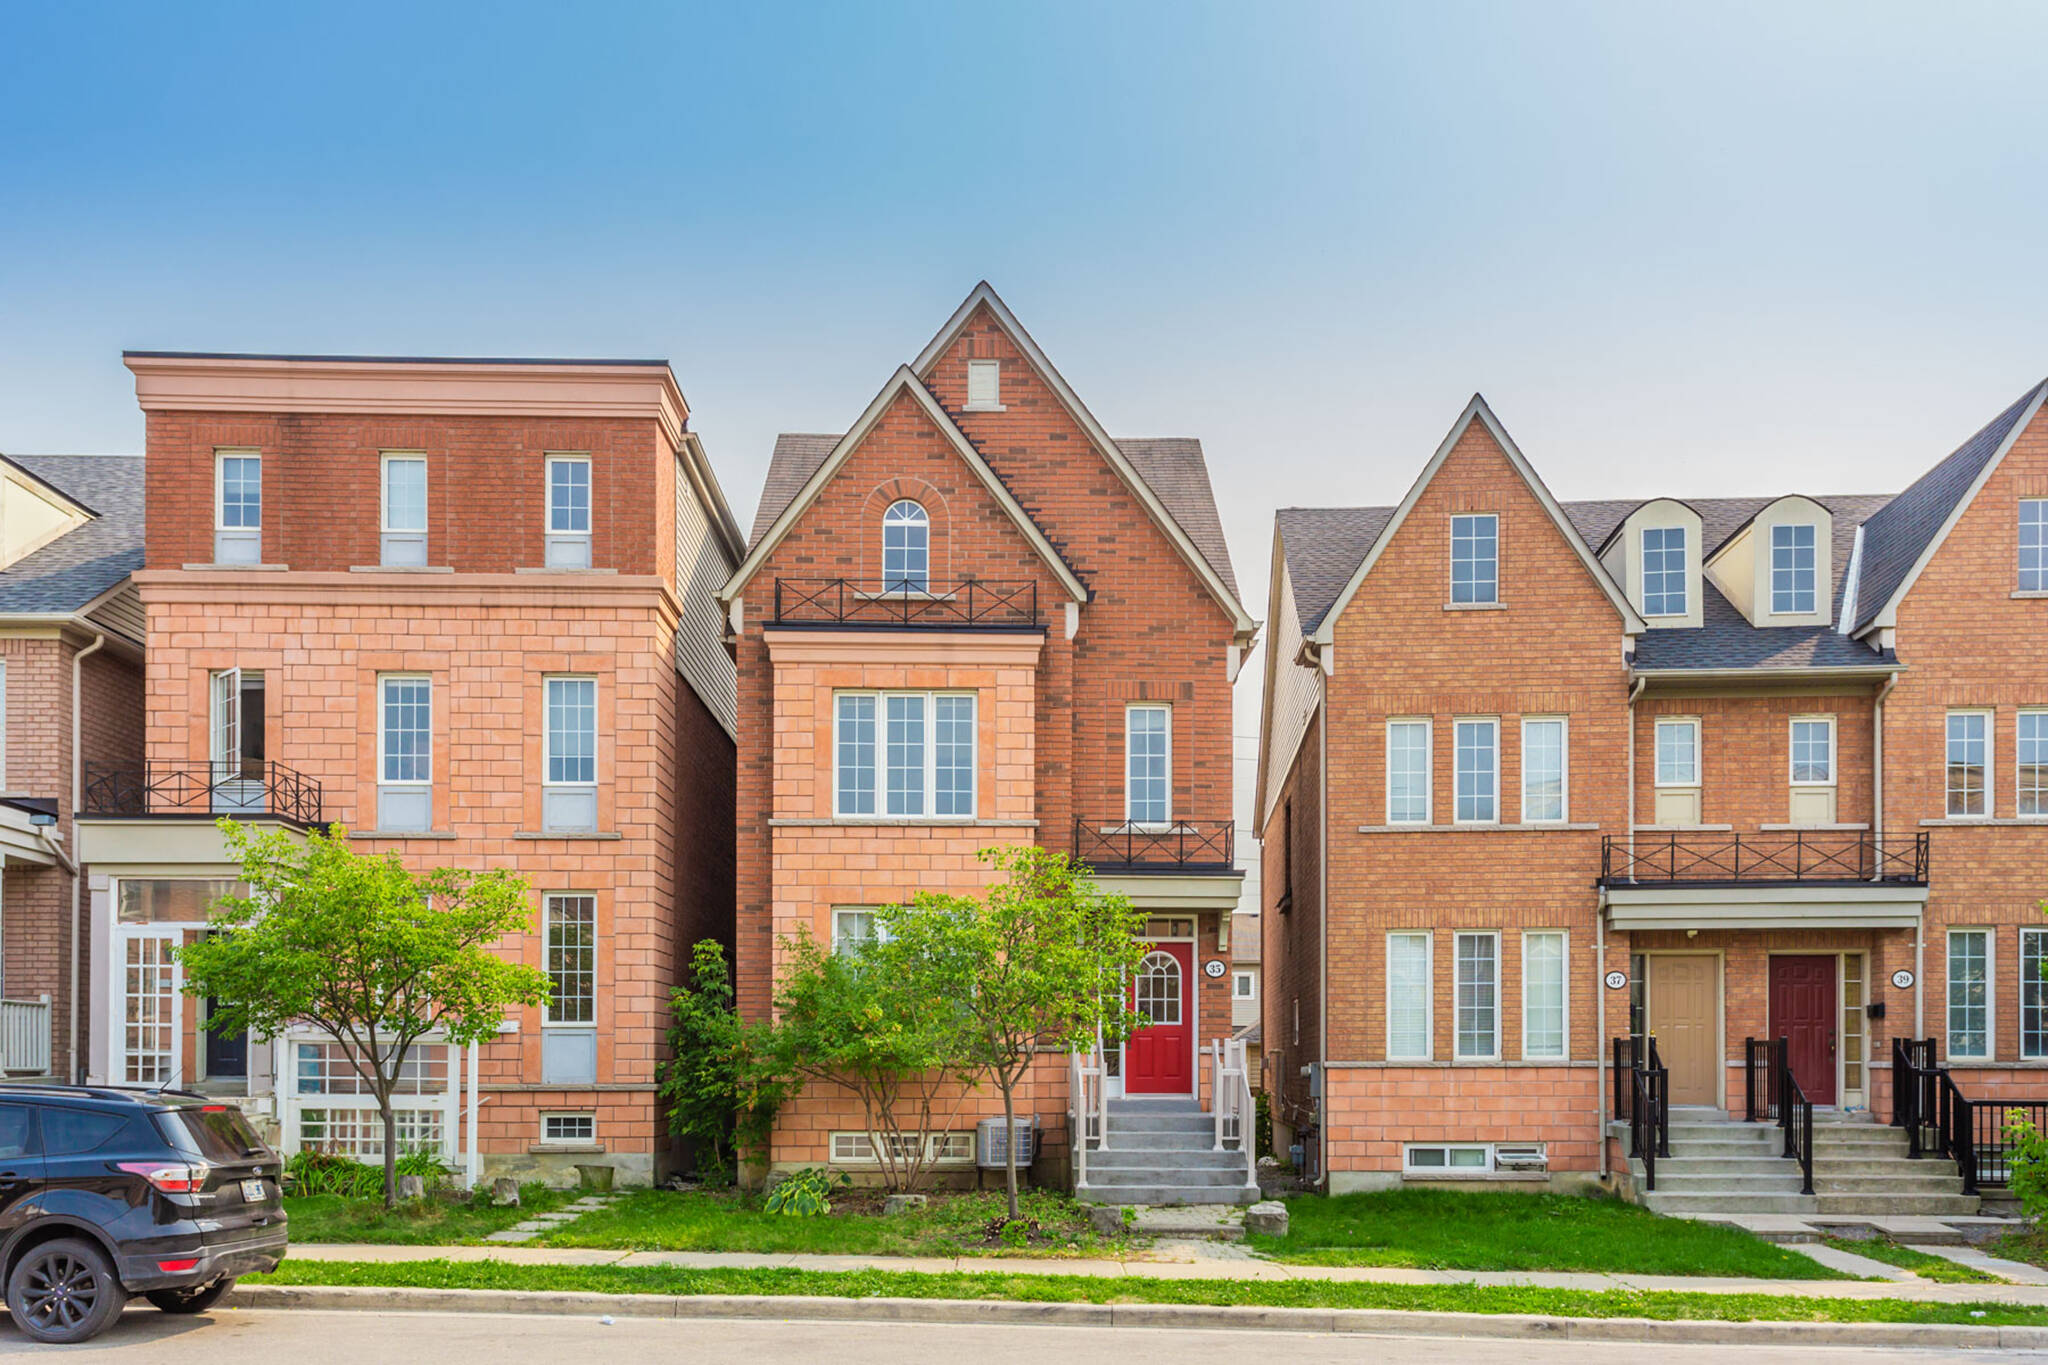 These Toronto neighbourhoods still have median house prices of less